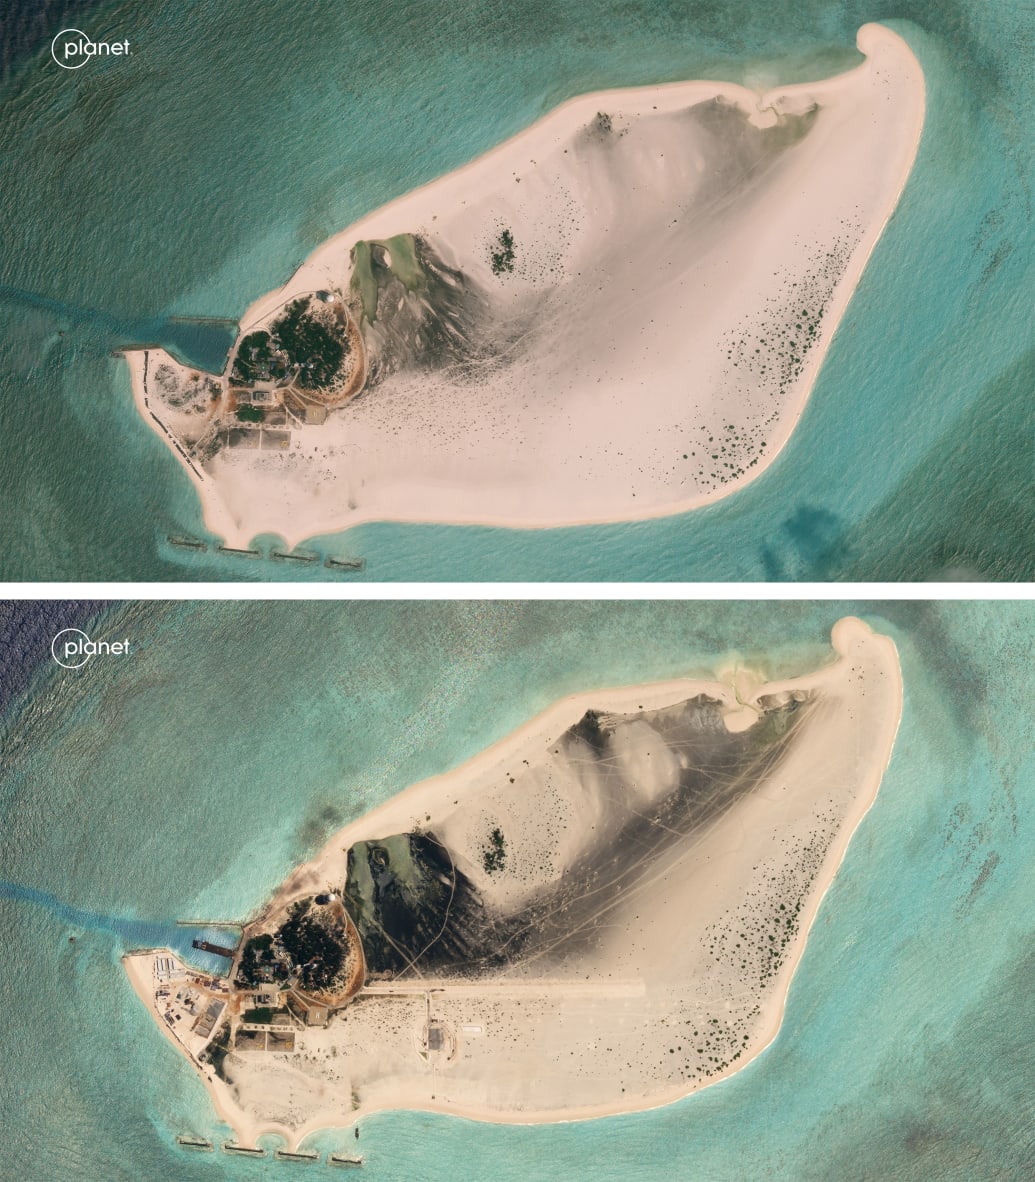 Two images, before and after, of Triton island that shows new development